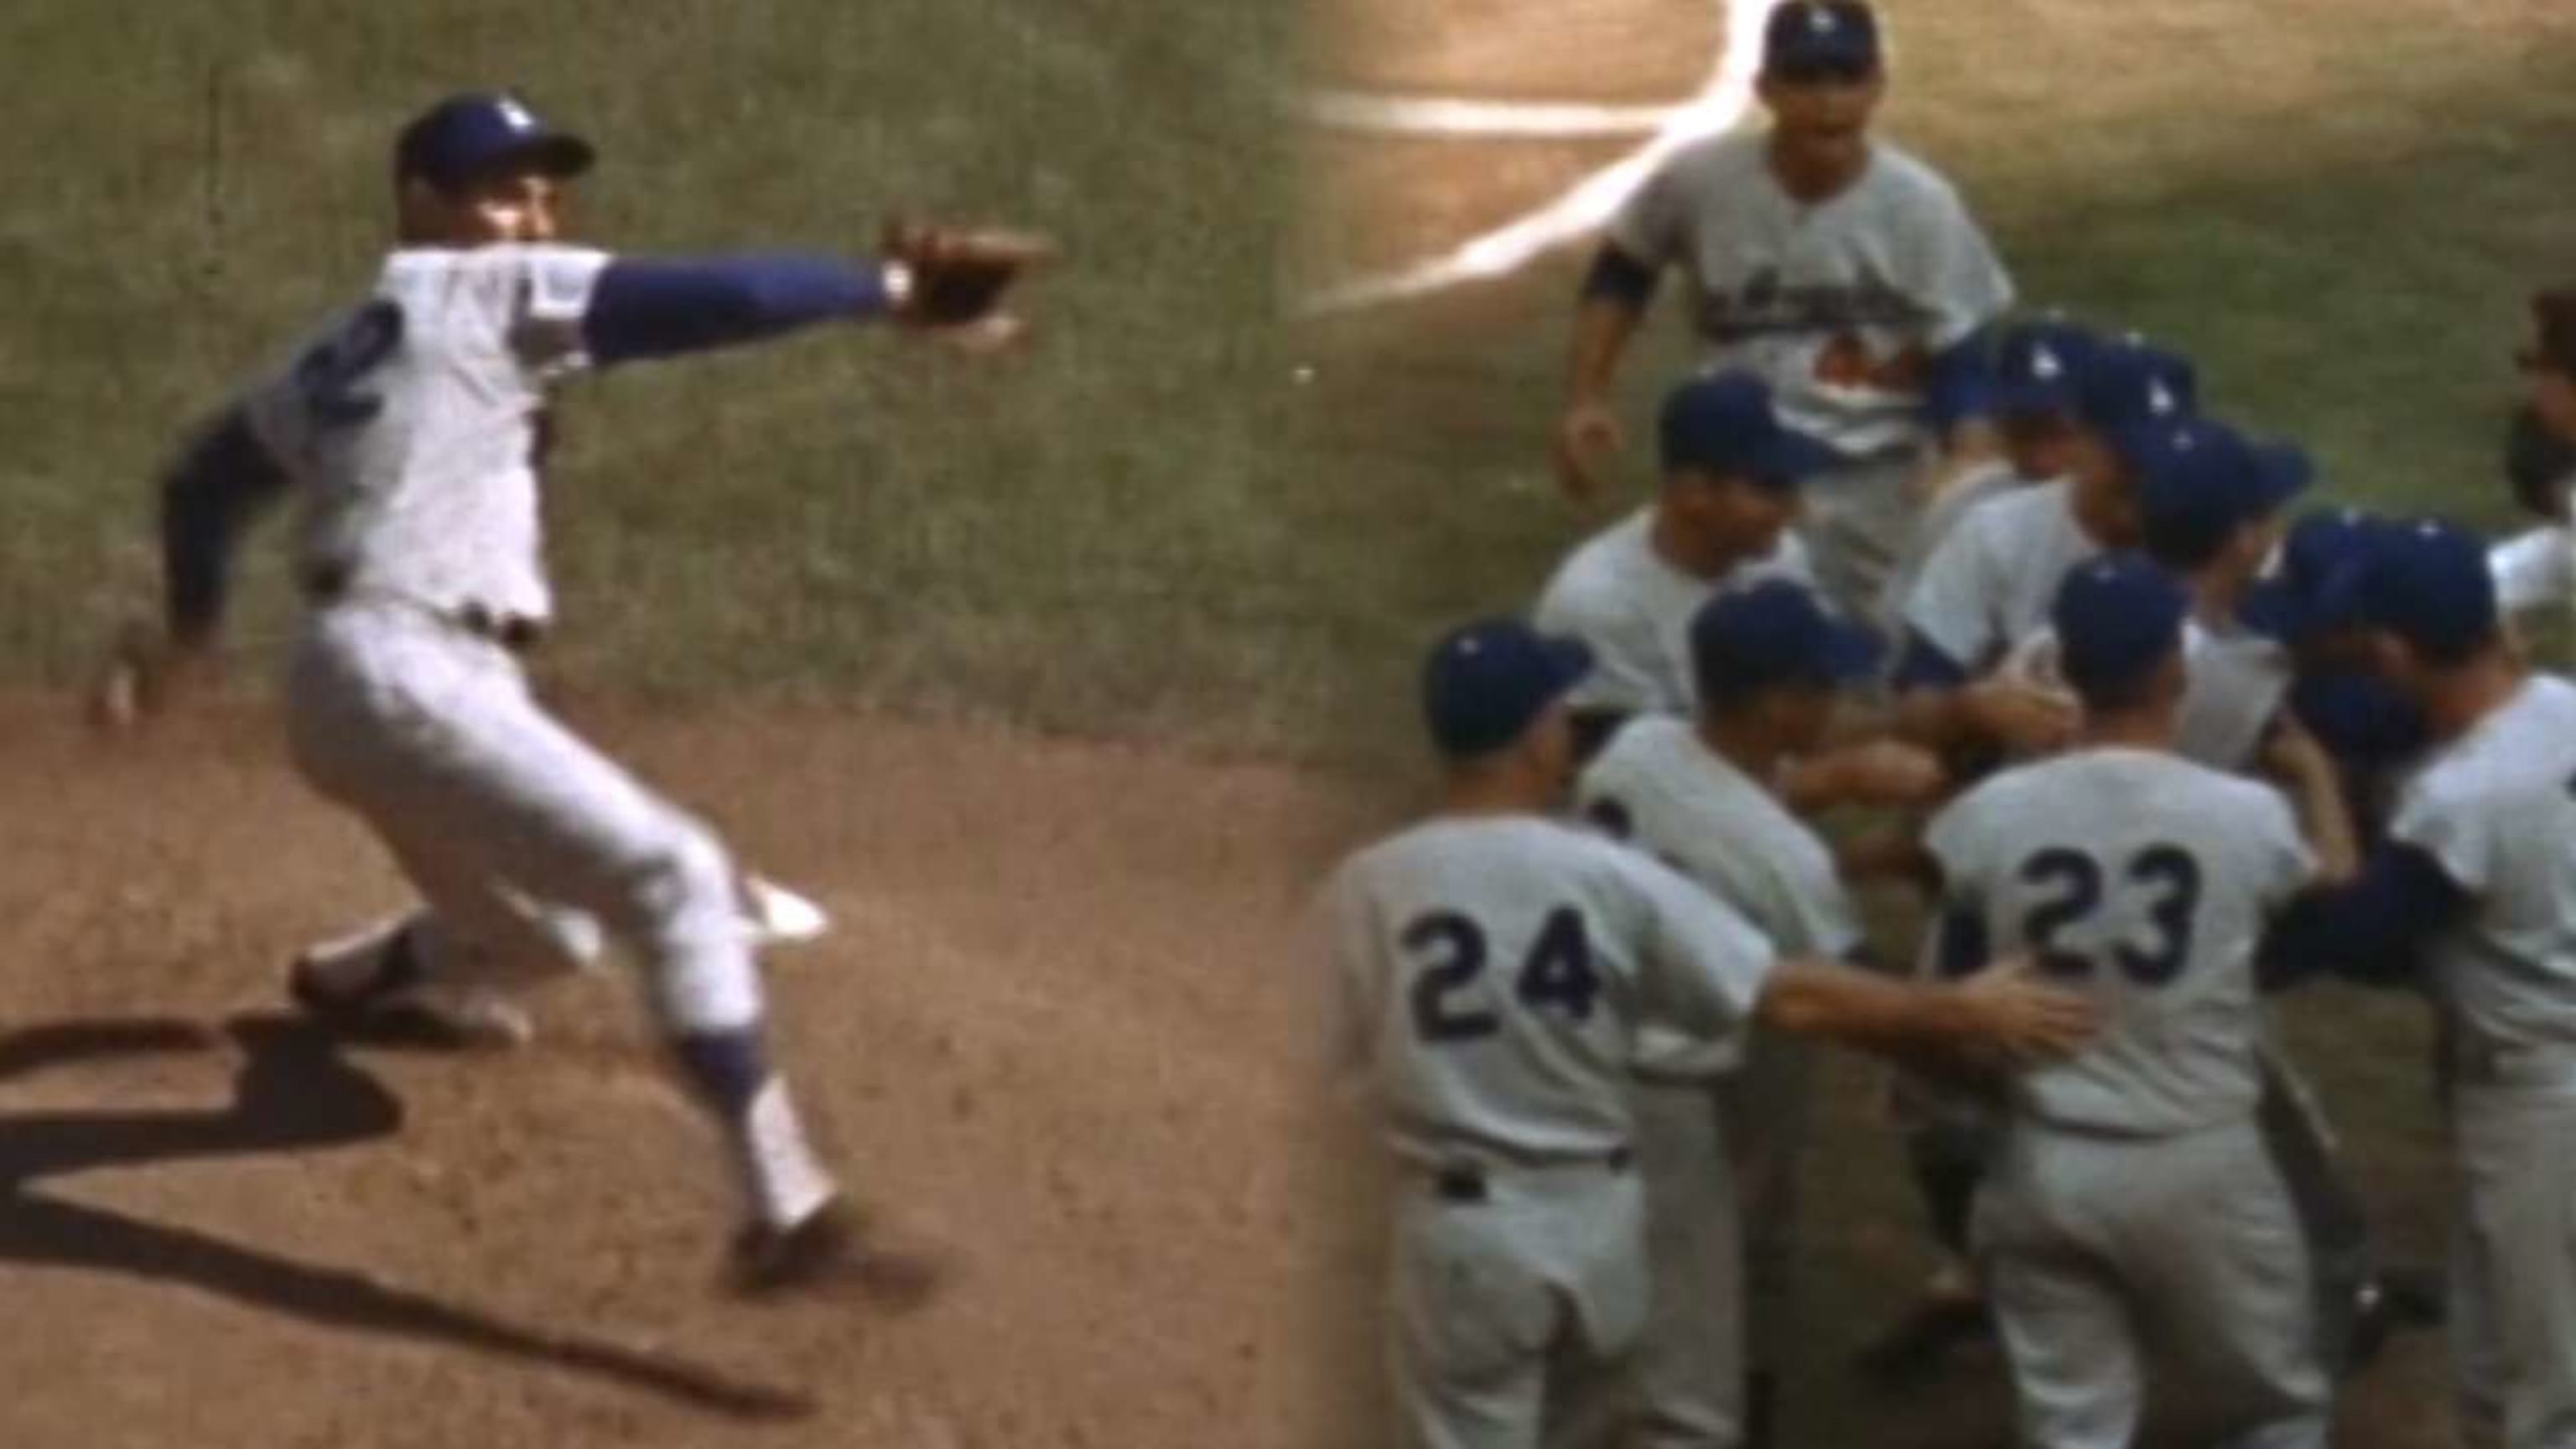 Must C: Koufax strikes out 15